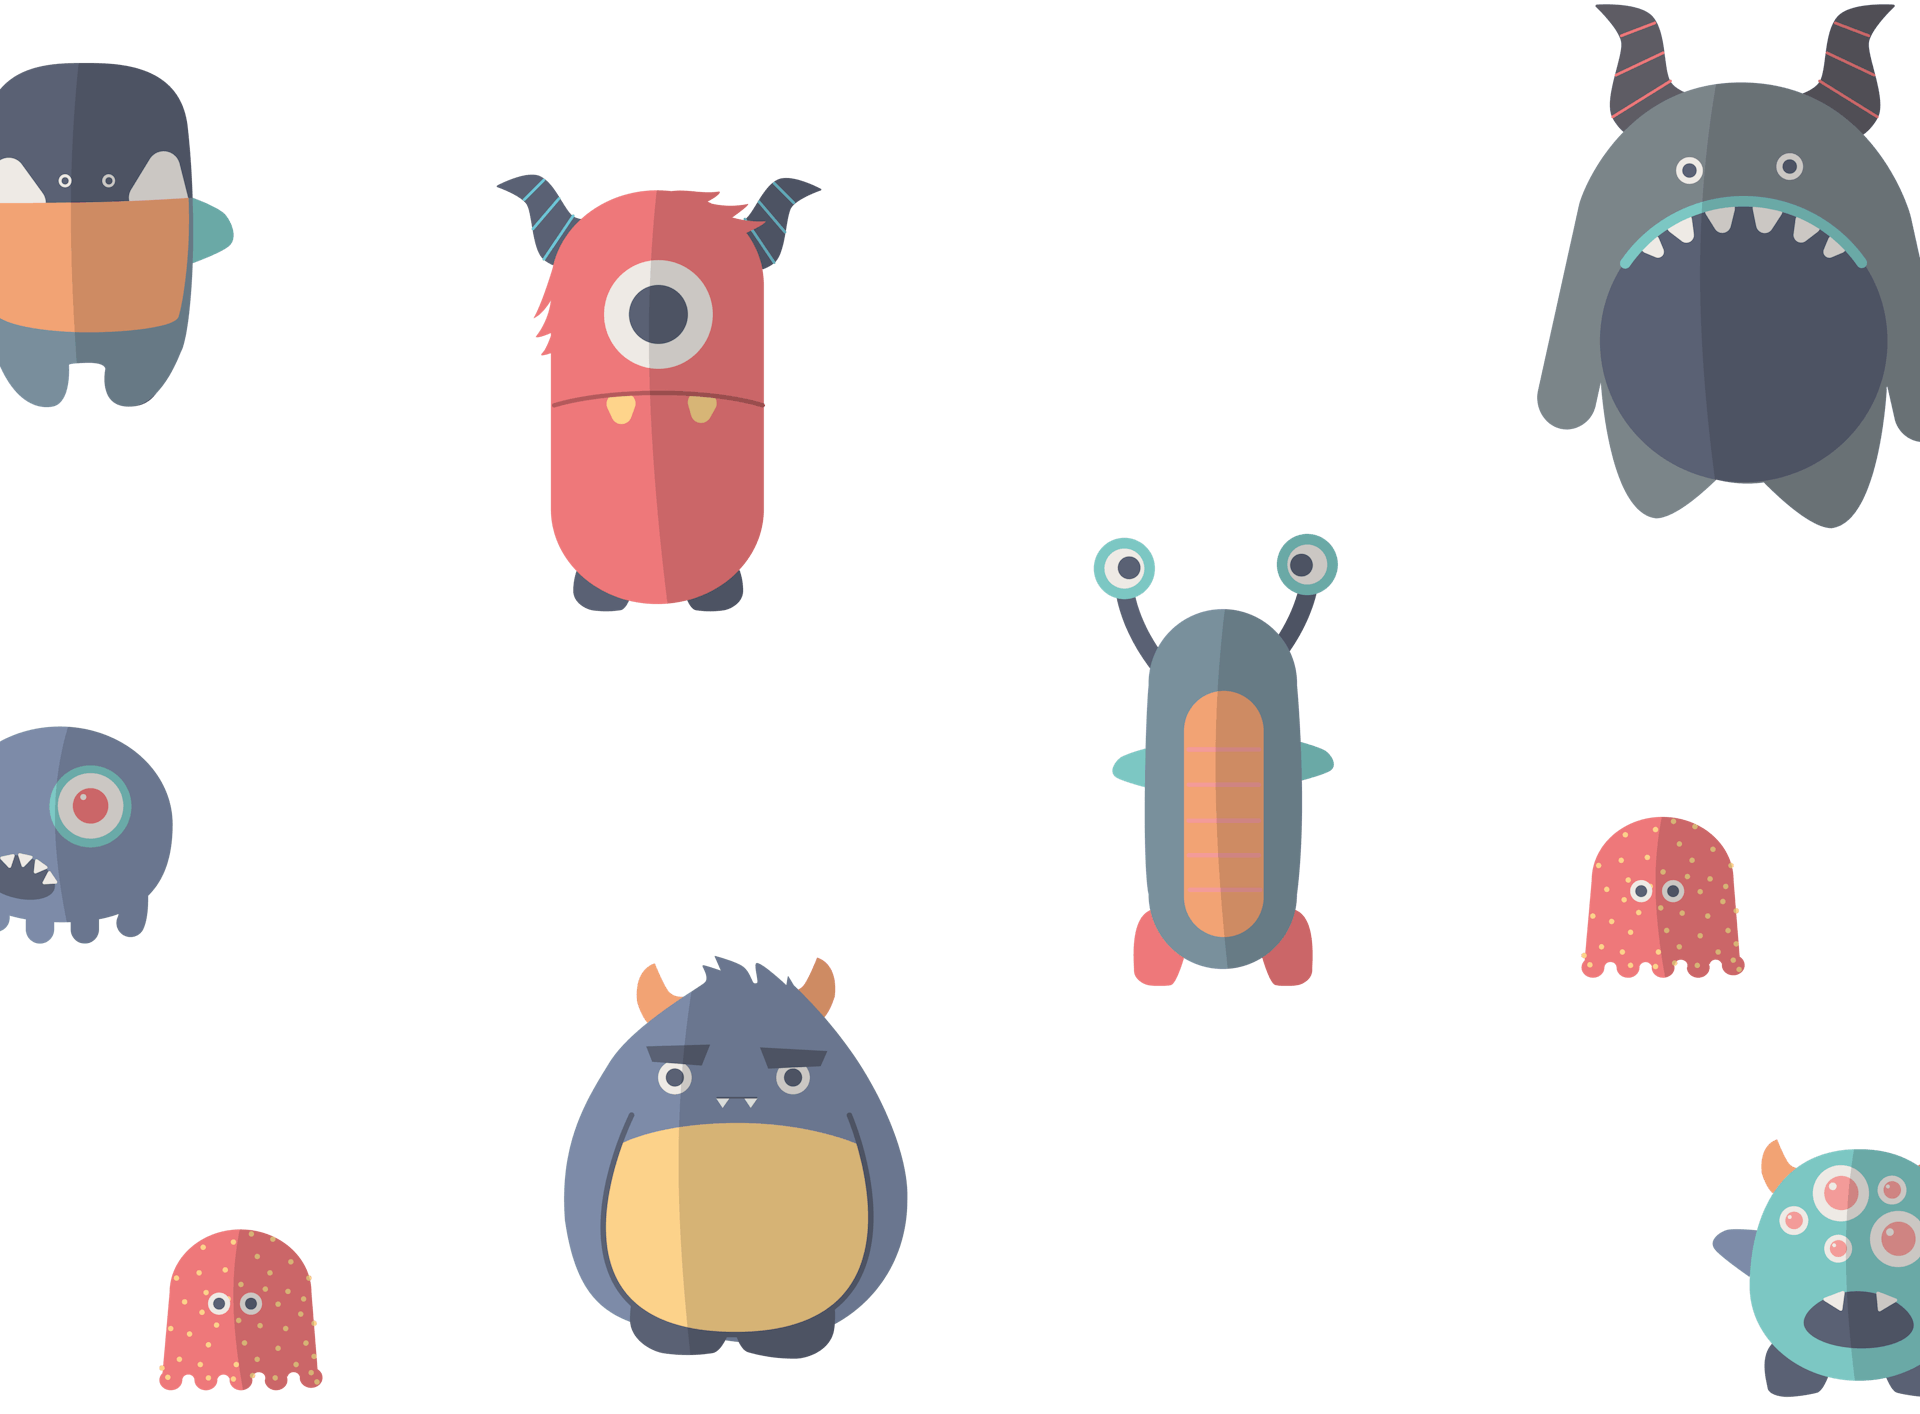 visualization of monsters which can occupy the patients mind